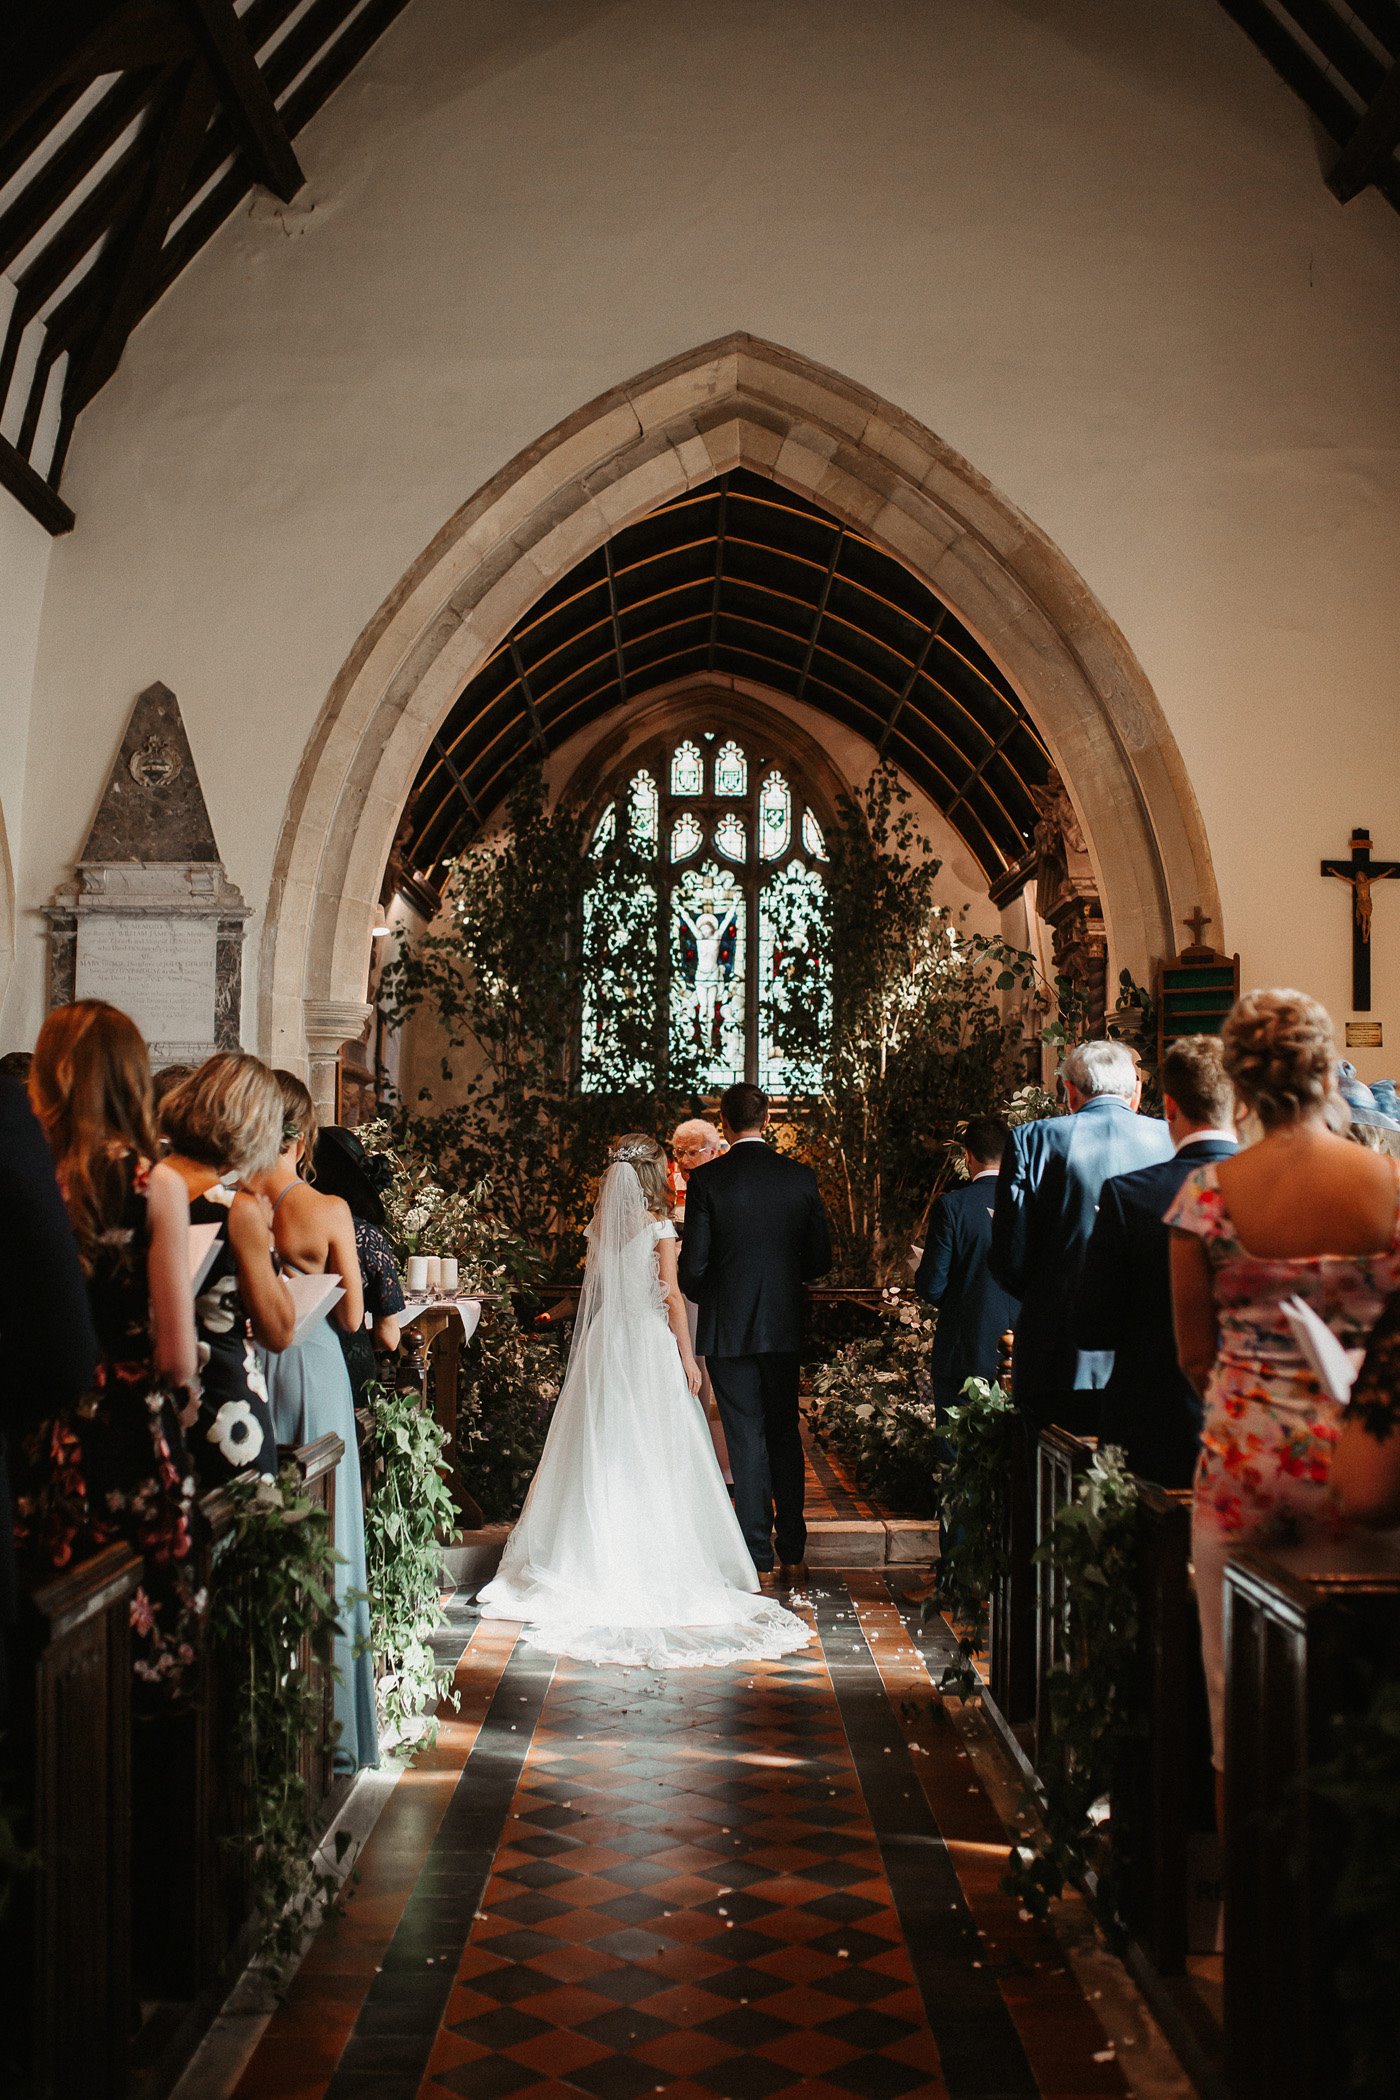 Bride and groom getting married in church in england